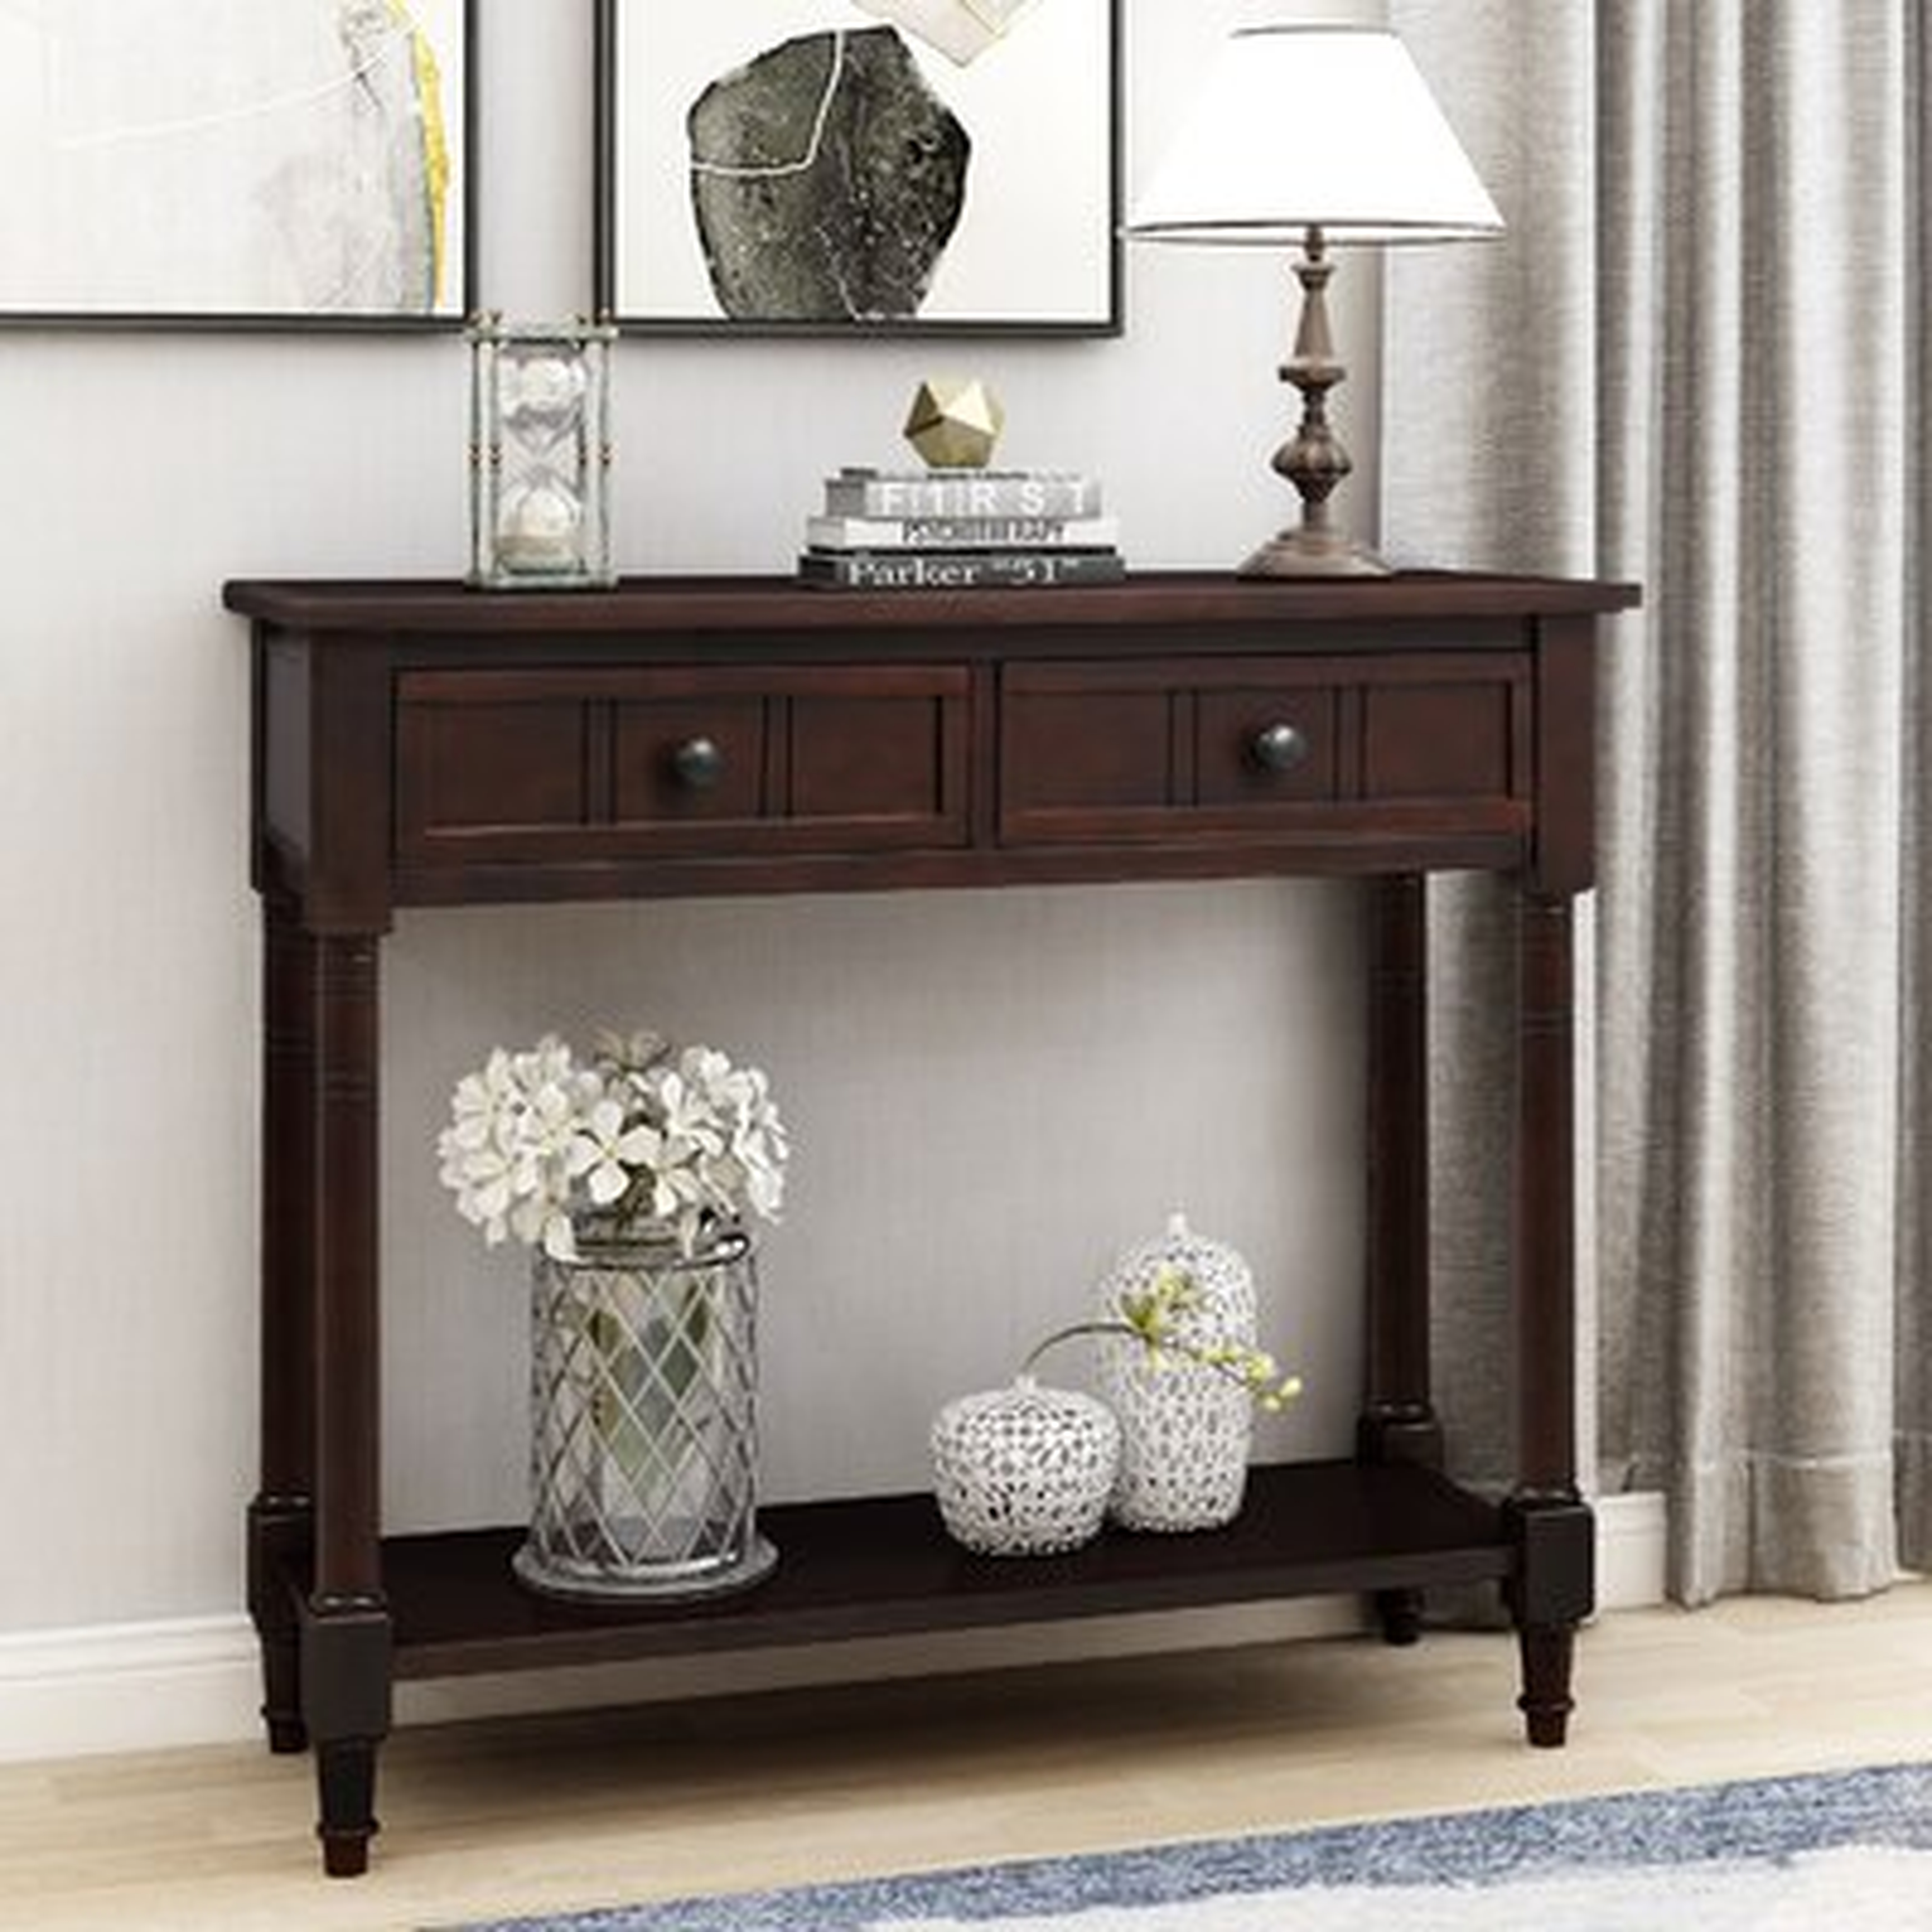 Console Table Traditional Design With Two Drawers And Bottom Shelf - Wayfair